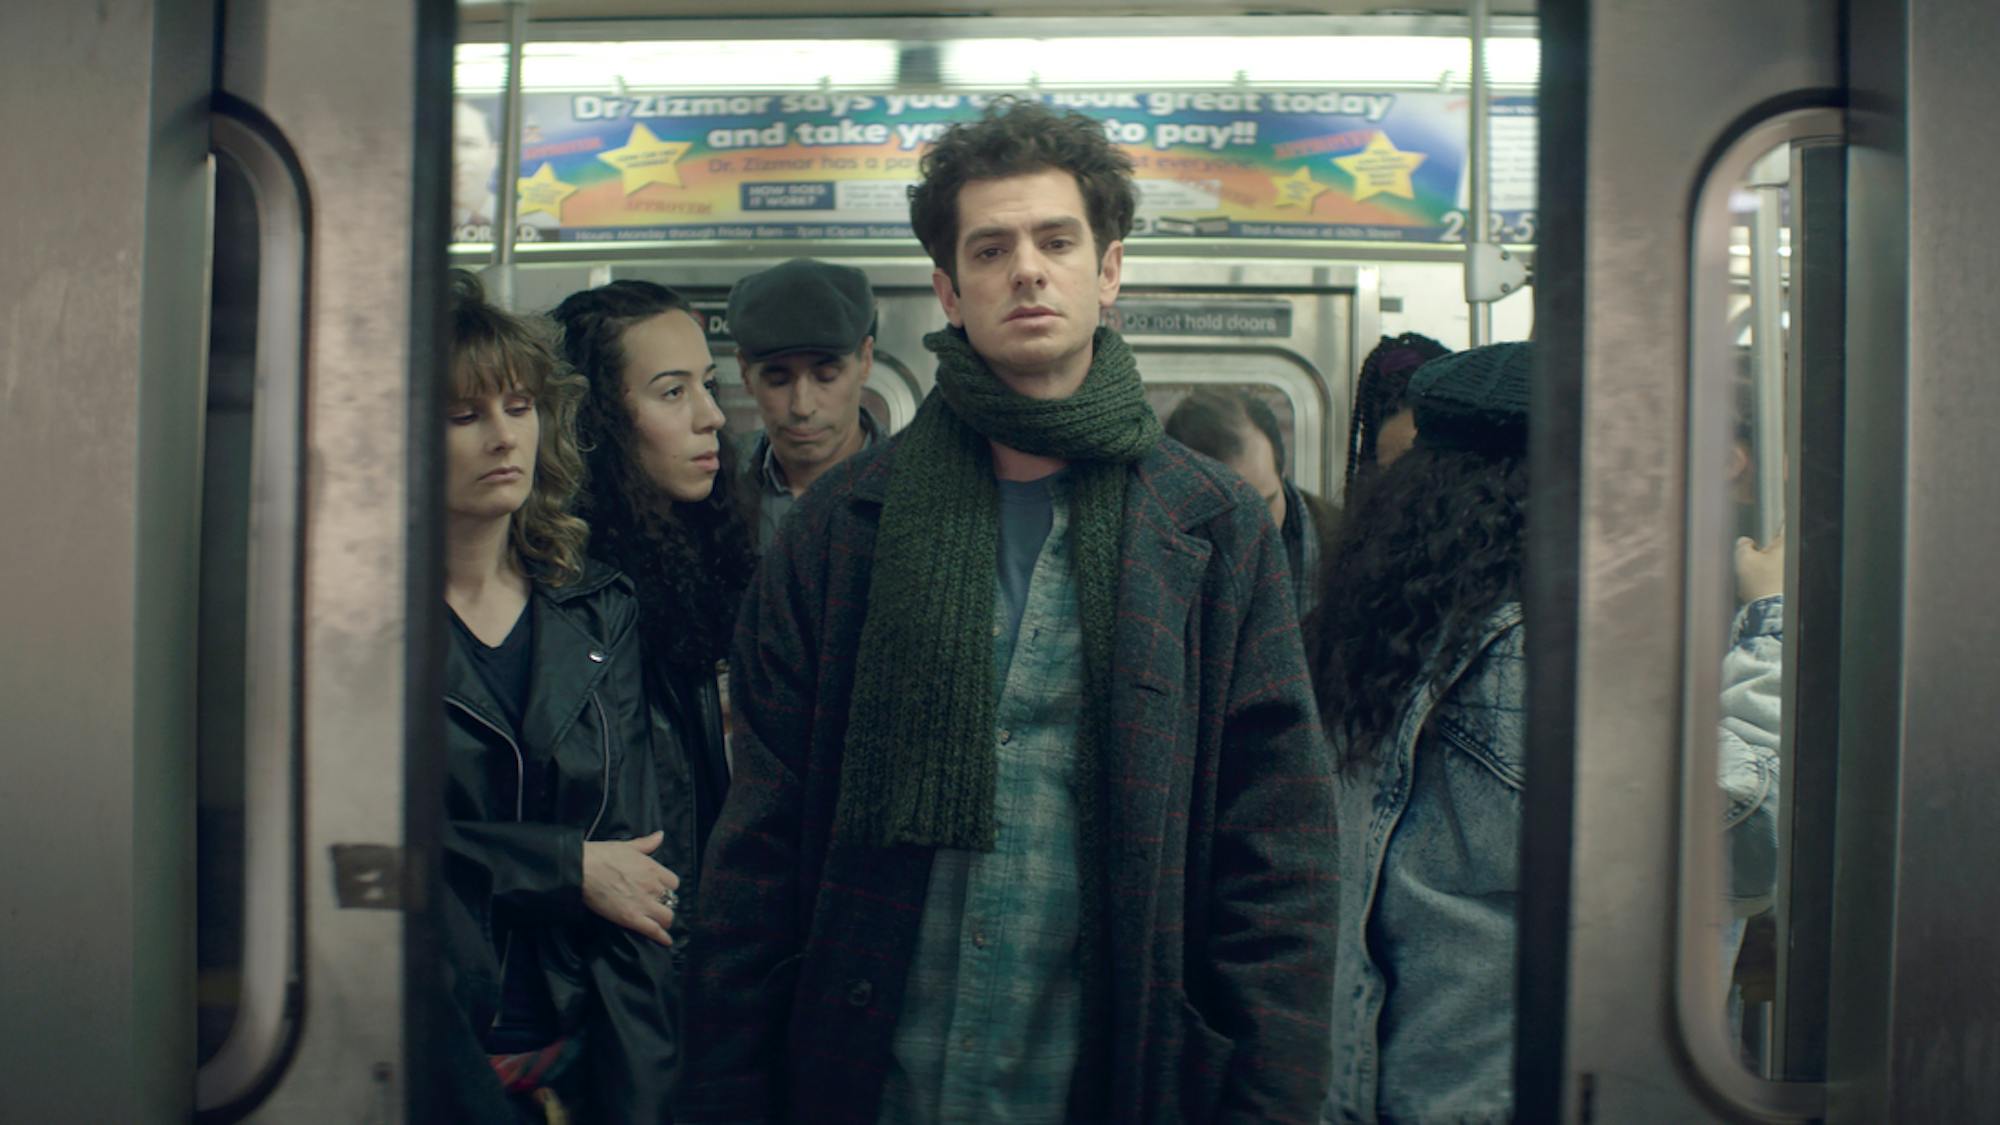 Andrew Garfield as Jonathan Larson wears a dark jacket, checkered shirt, and green scarf as he stands between closing subway doors.